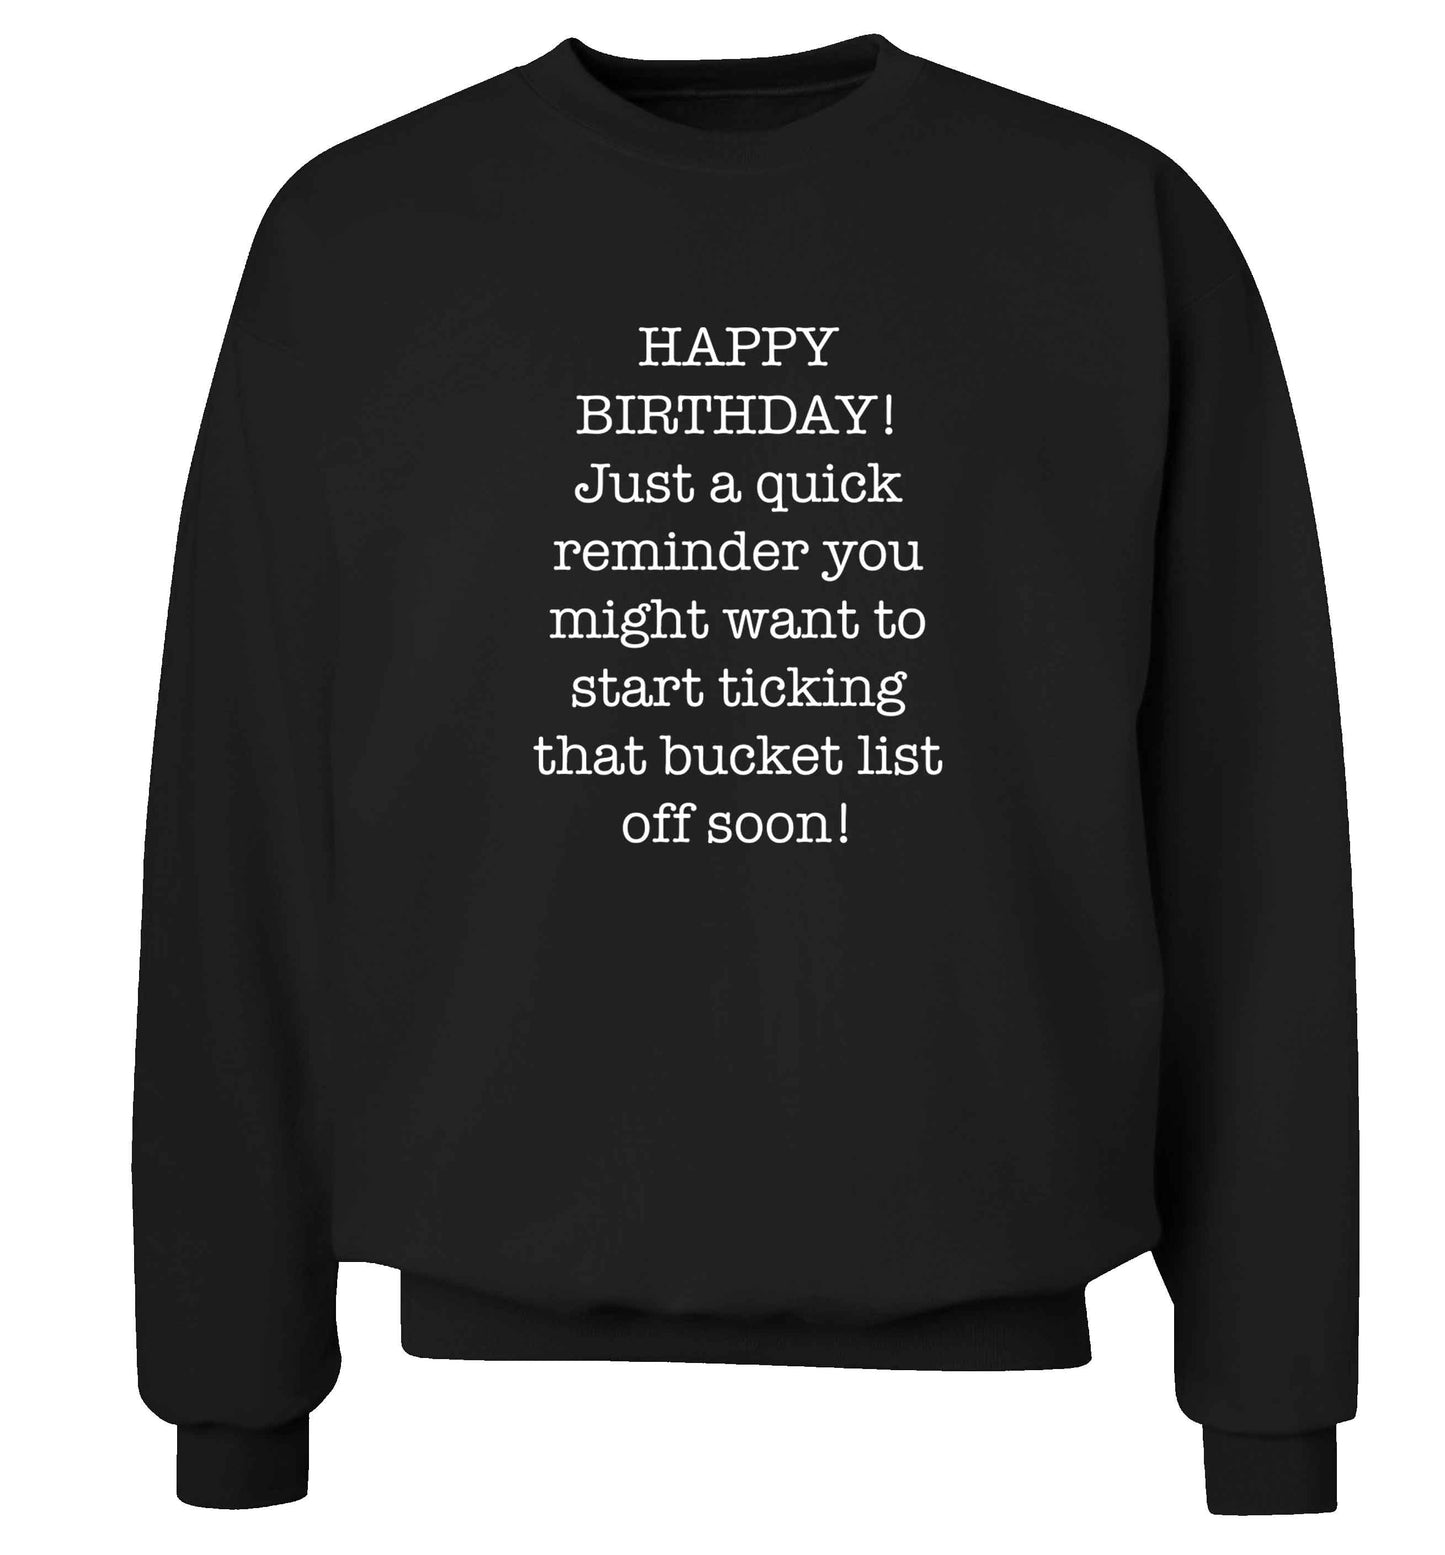 Happy birthday, just a quick reminder you might want to start ticking that bucket list off soon adult's unisex black sweater 2XL